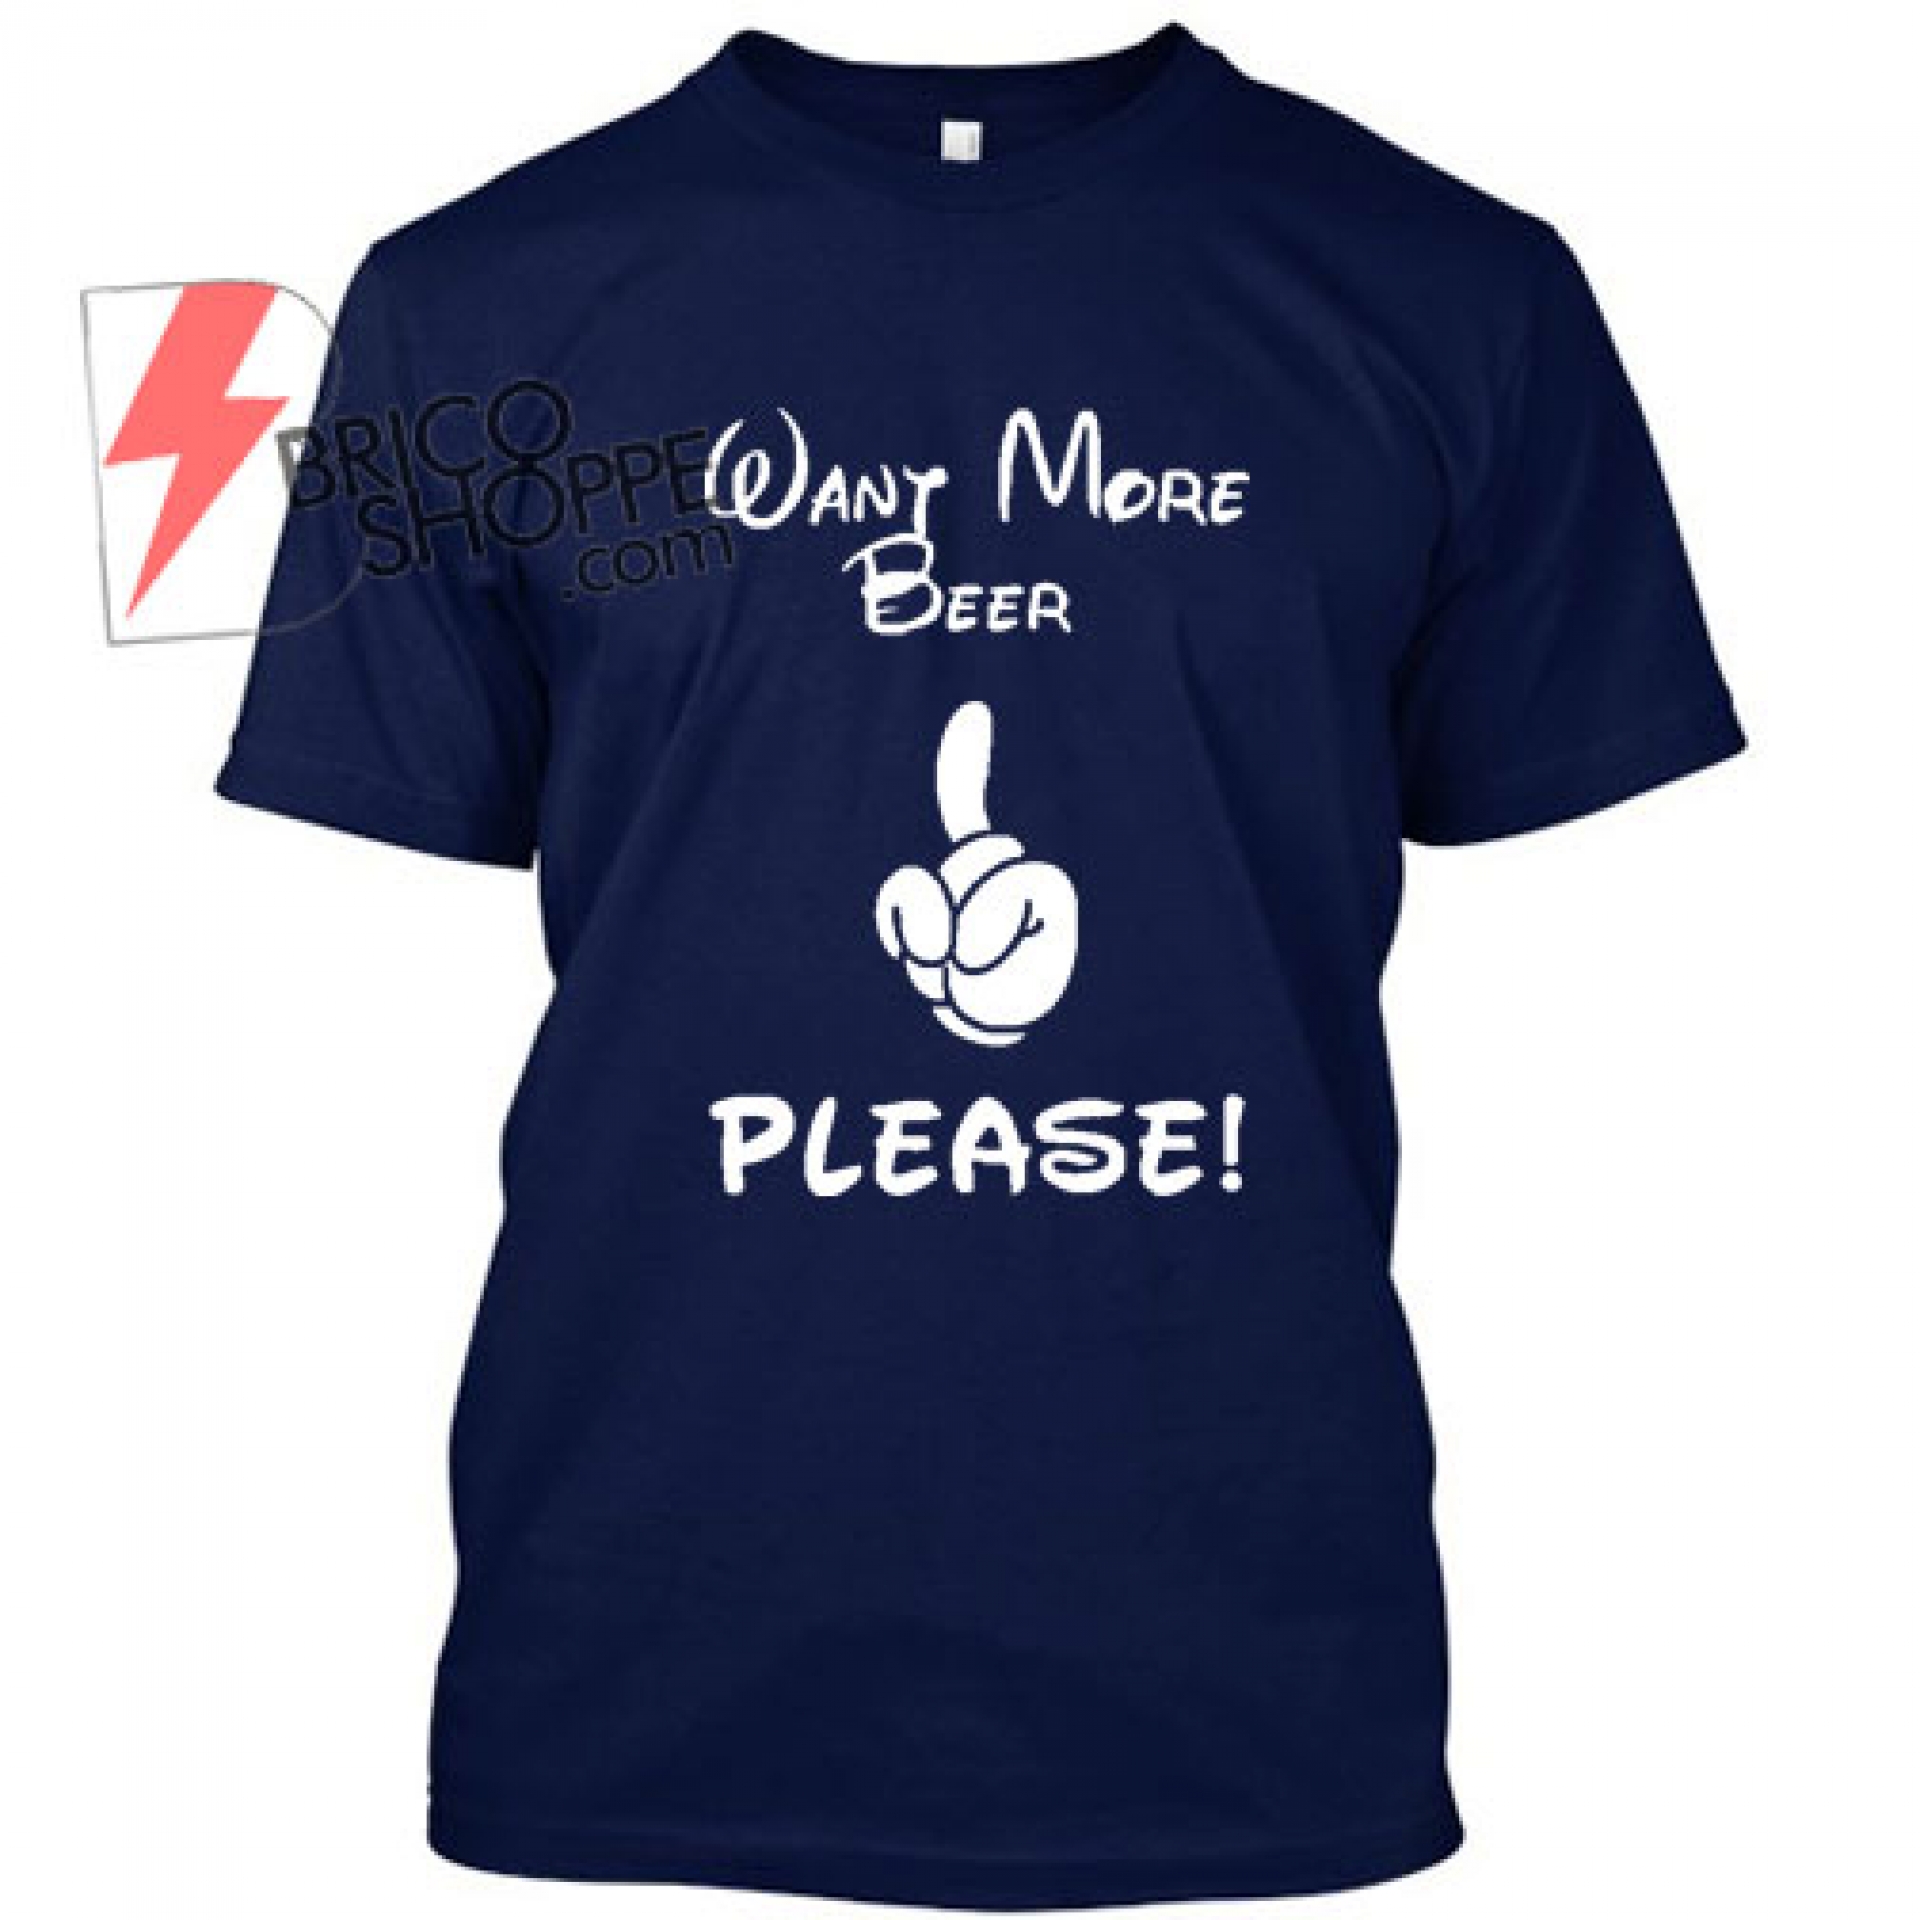 Want-More-Beer-Please!-T-Shirt